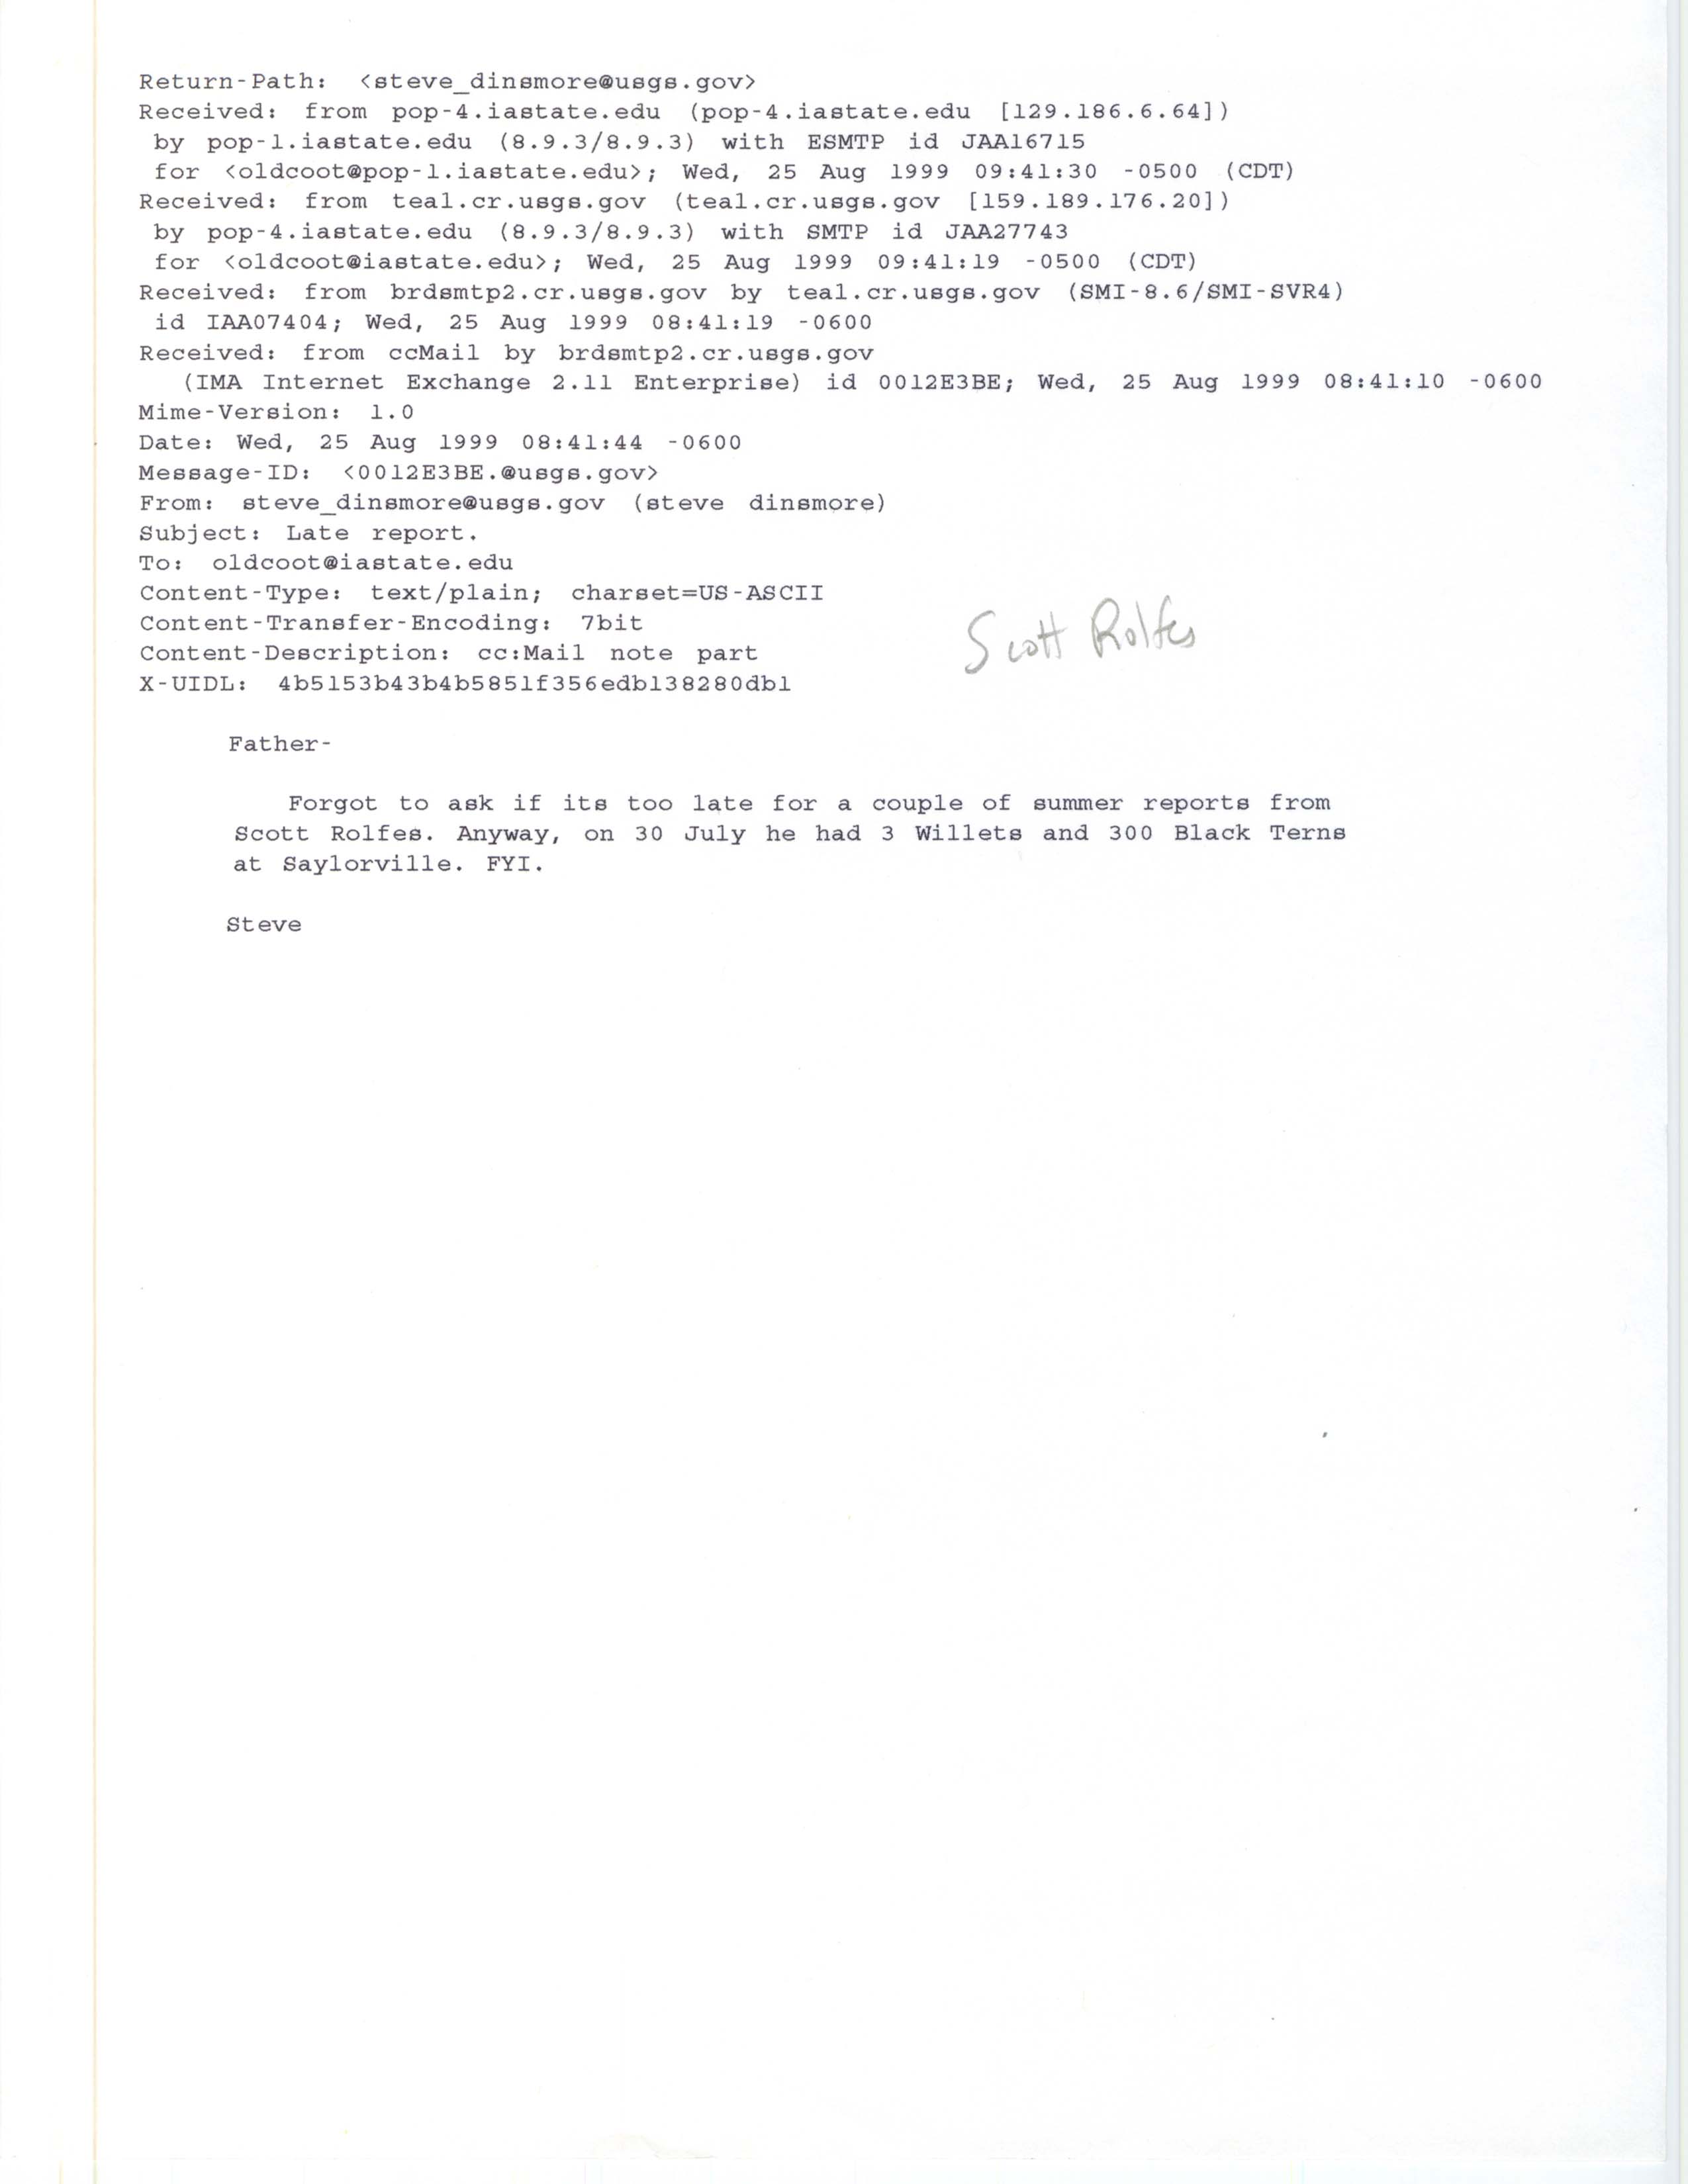 Steve Dinsmore email to Jim Dinsmore regarding late reports, August 25, 1999